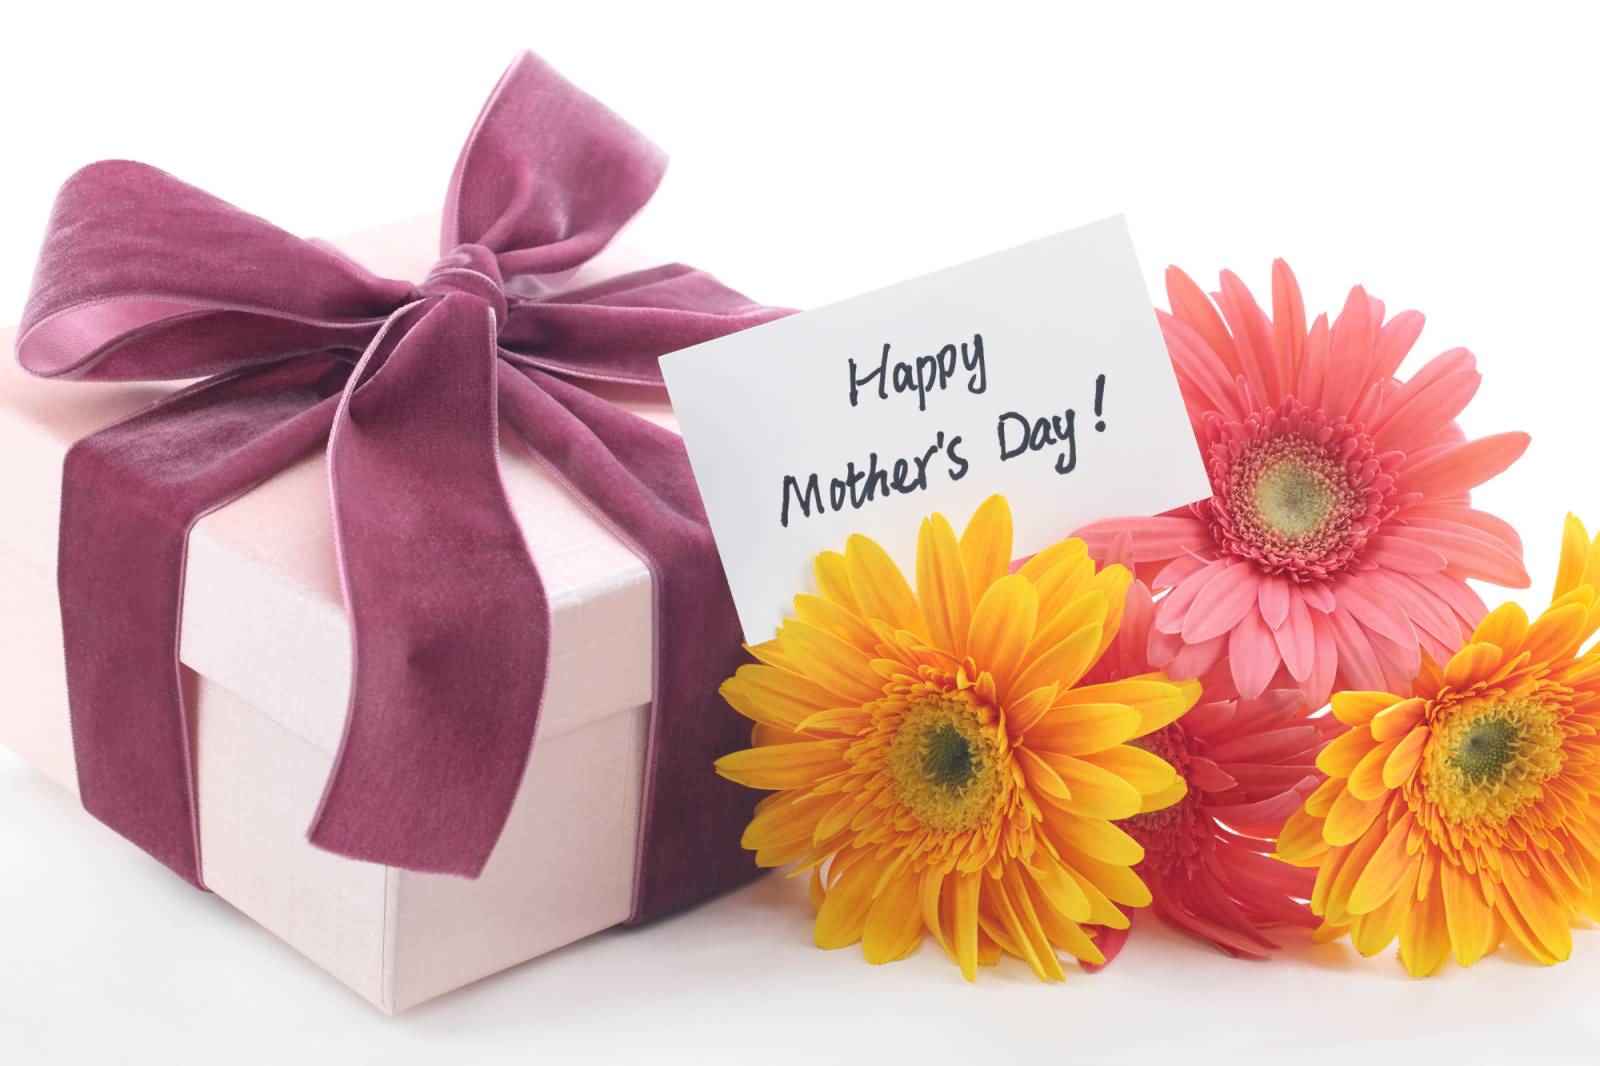 Happy Mother's Day Note With Gift Box And Flowers